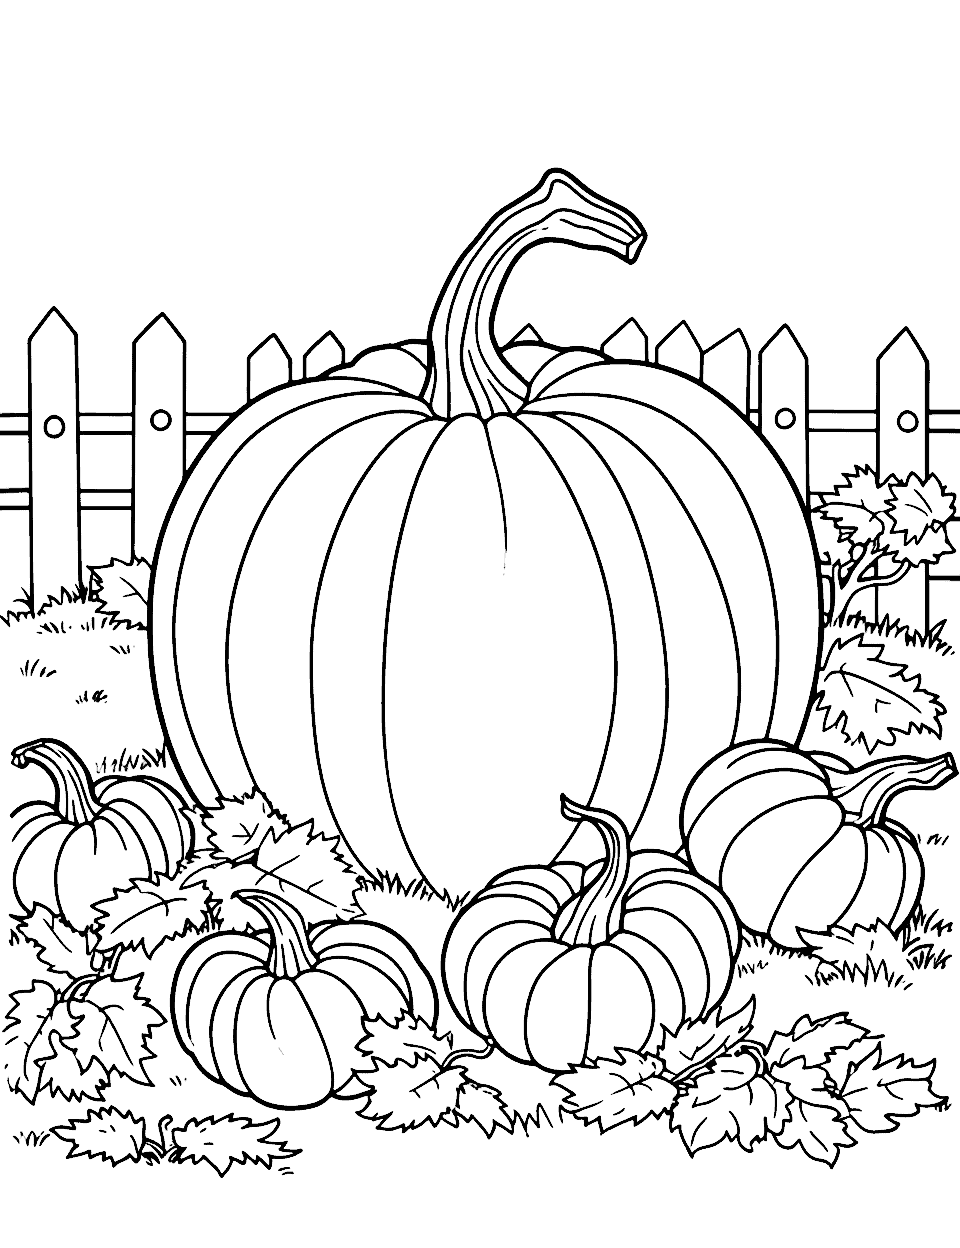 Pumpkin Harvest Time Thanksgiving Coloring Page - A coloring page showing the process of harvesting pumpkins.